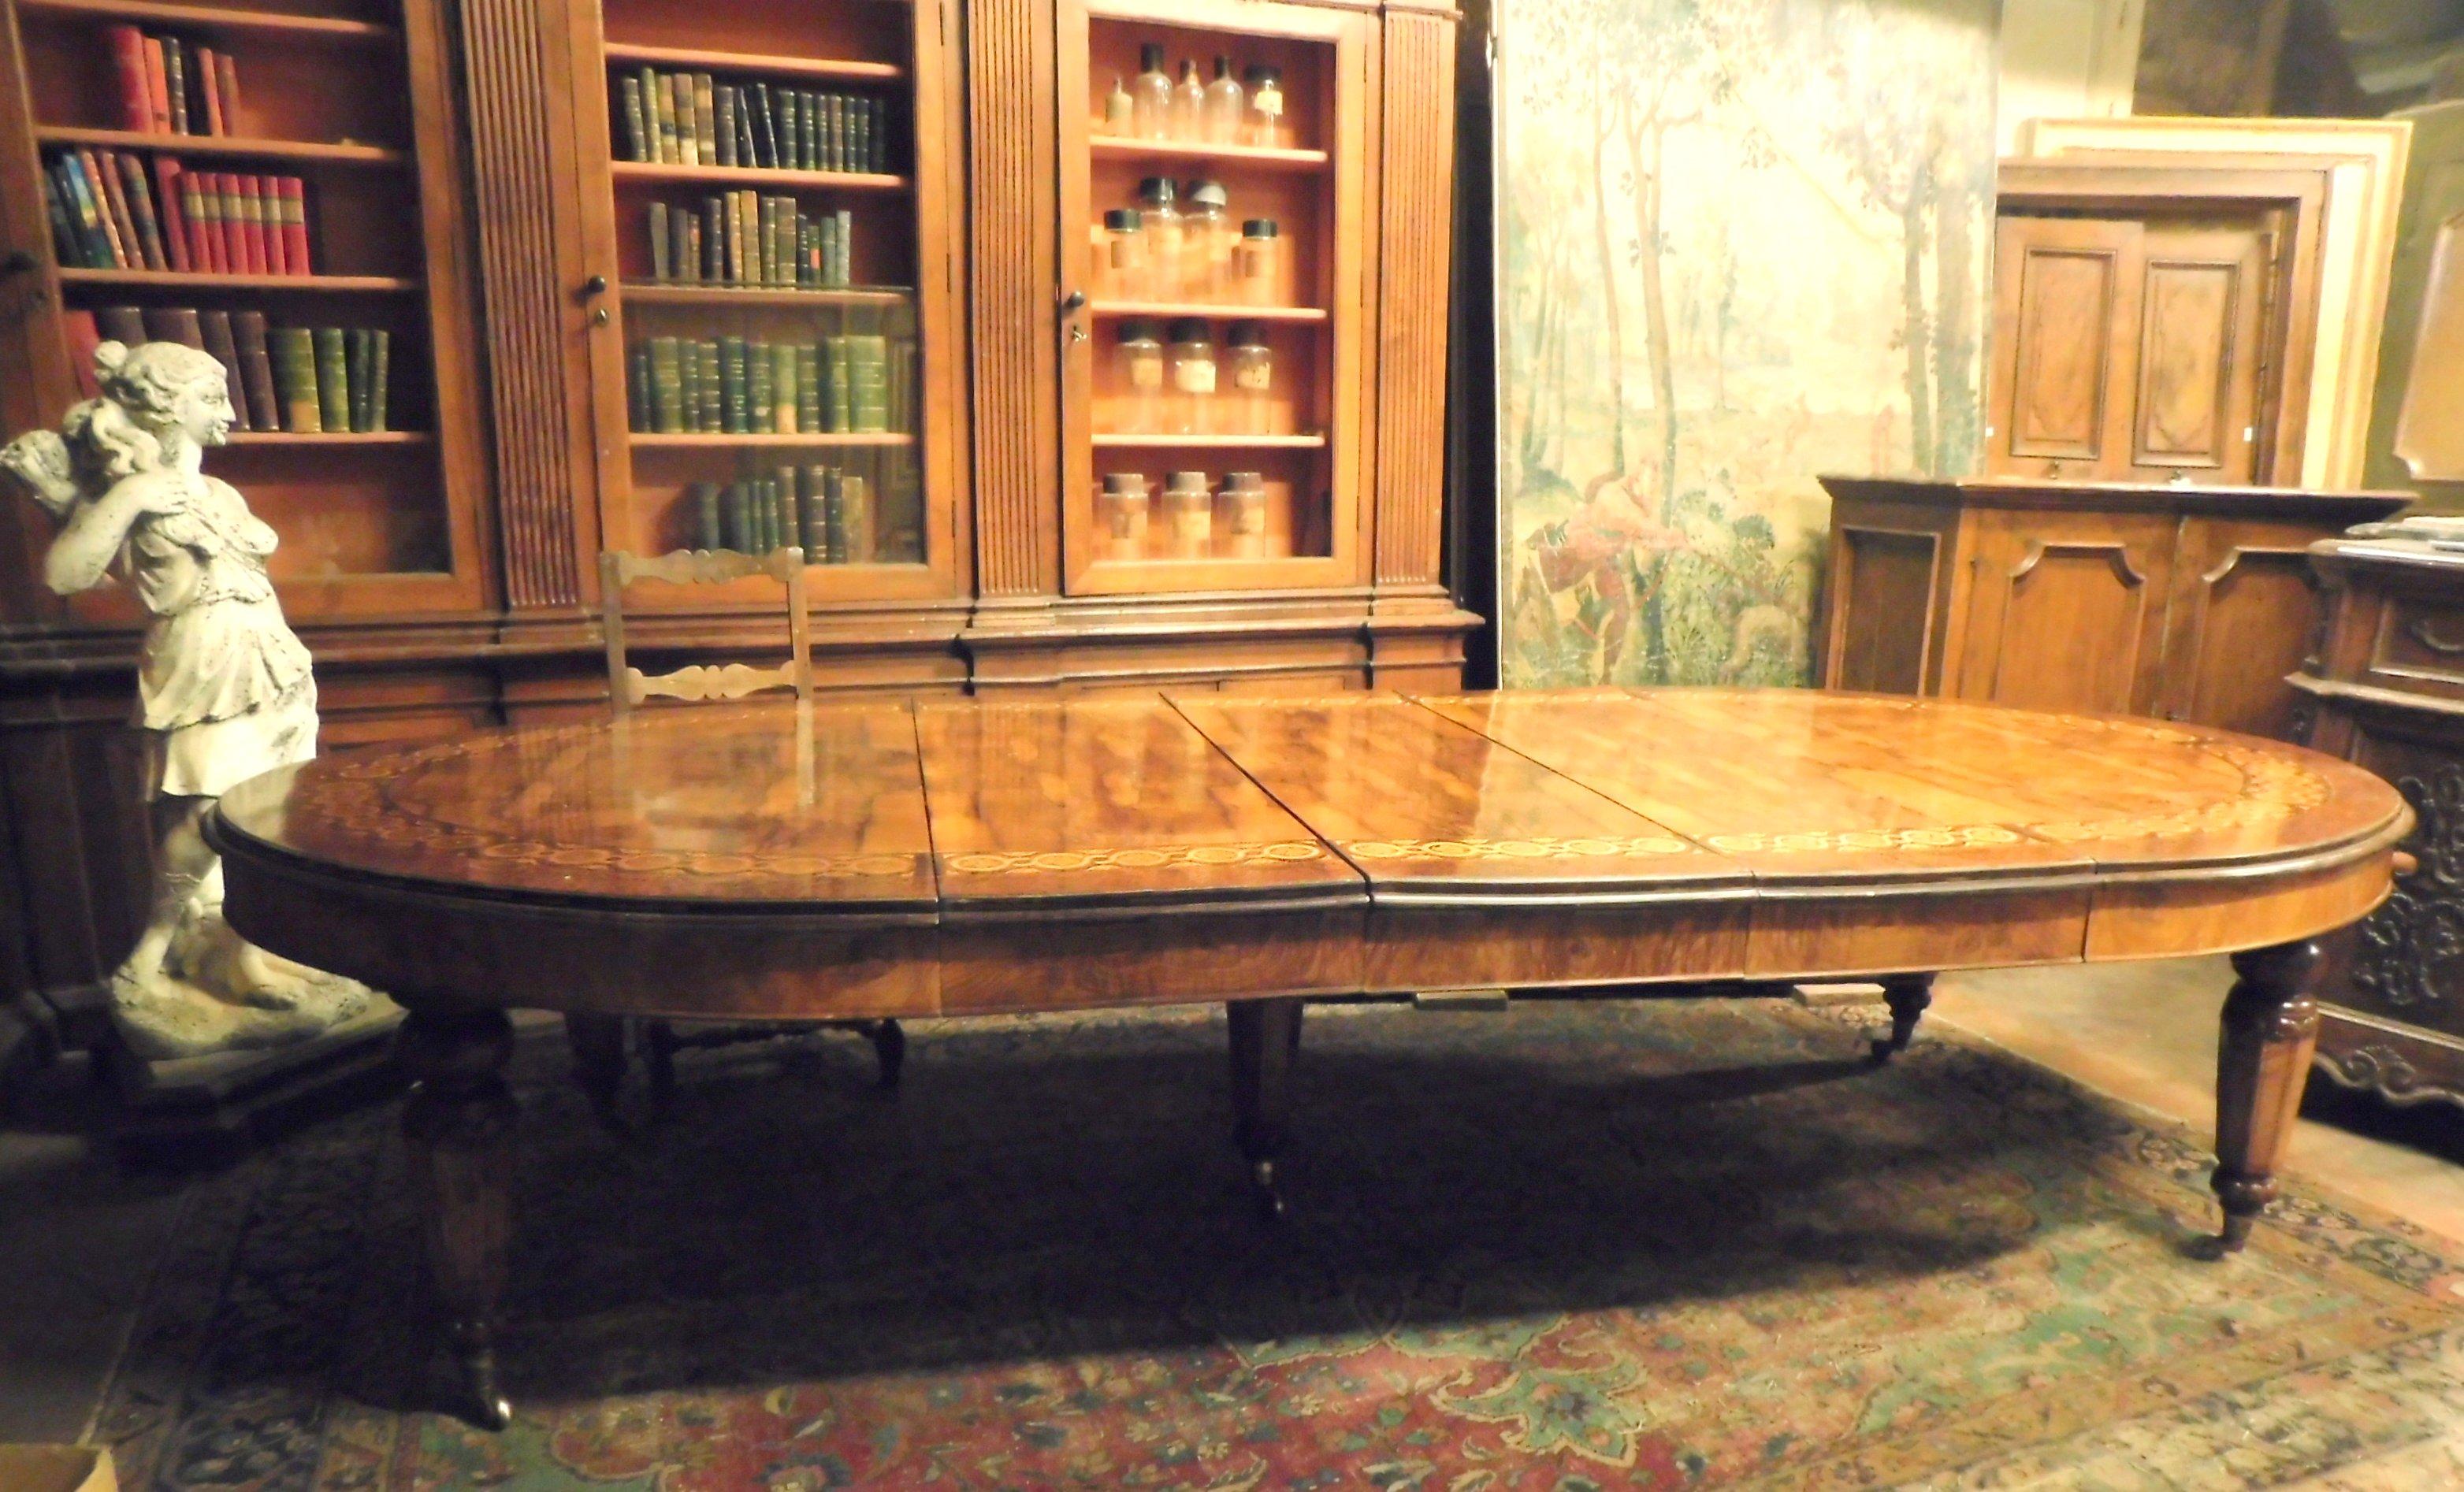 19th Century Antique Extendable Inlaid Wood Dining Table, Glossy Wick Brown, 1800 English